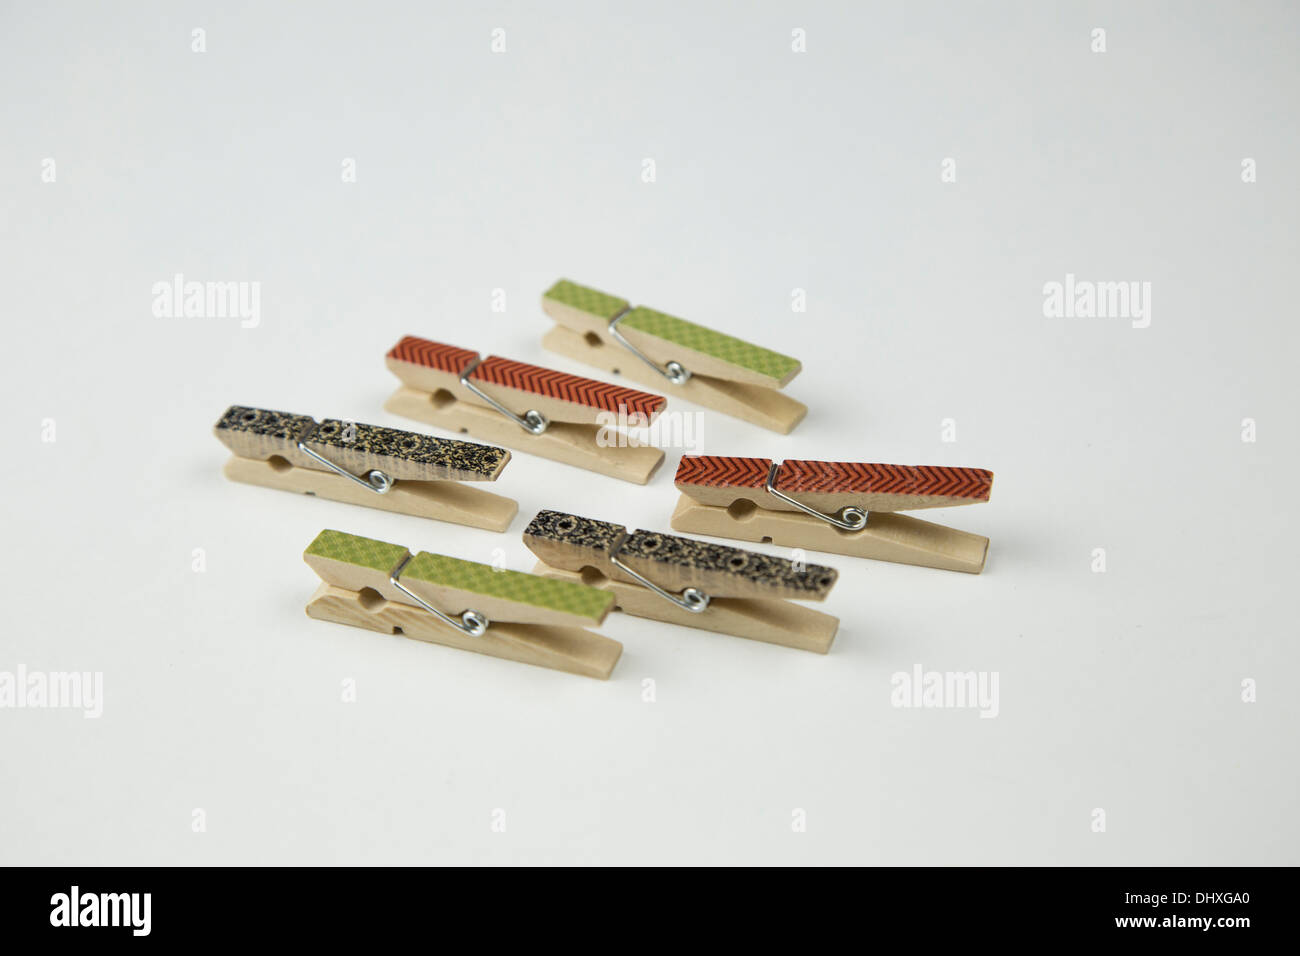 clothespin color red green orange purple wash old old fashioned pin cloth clothes small tiny colour colored nice still life Stock Photo